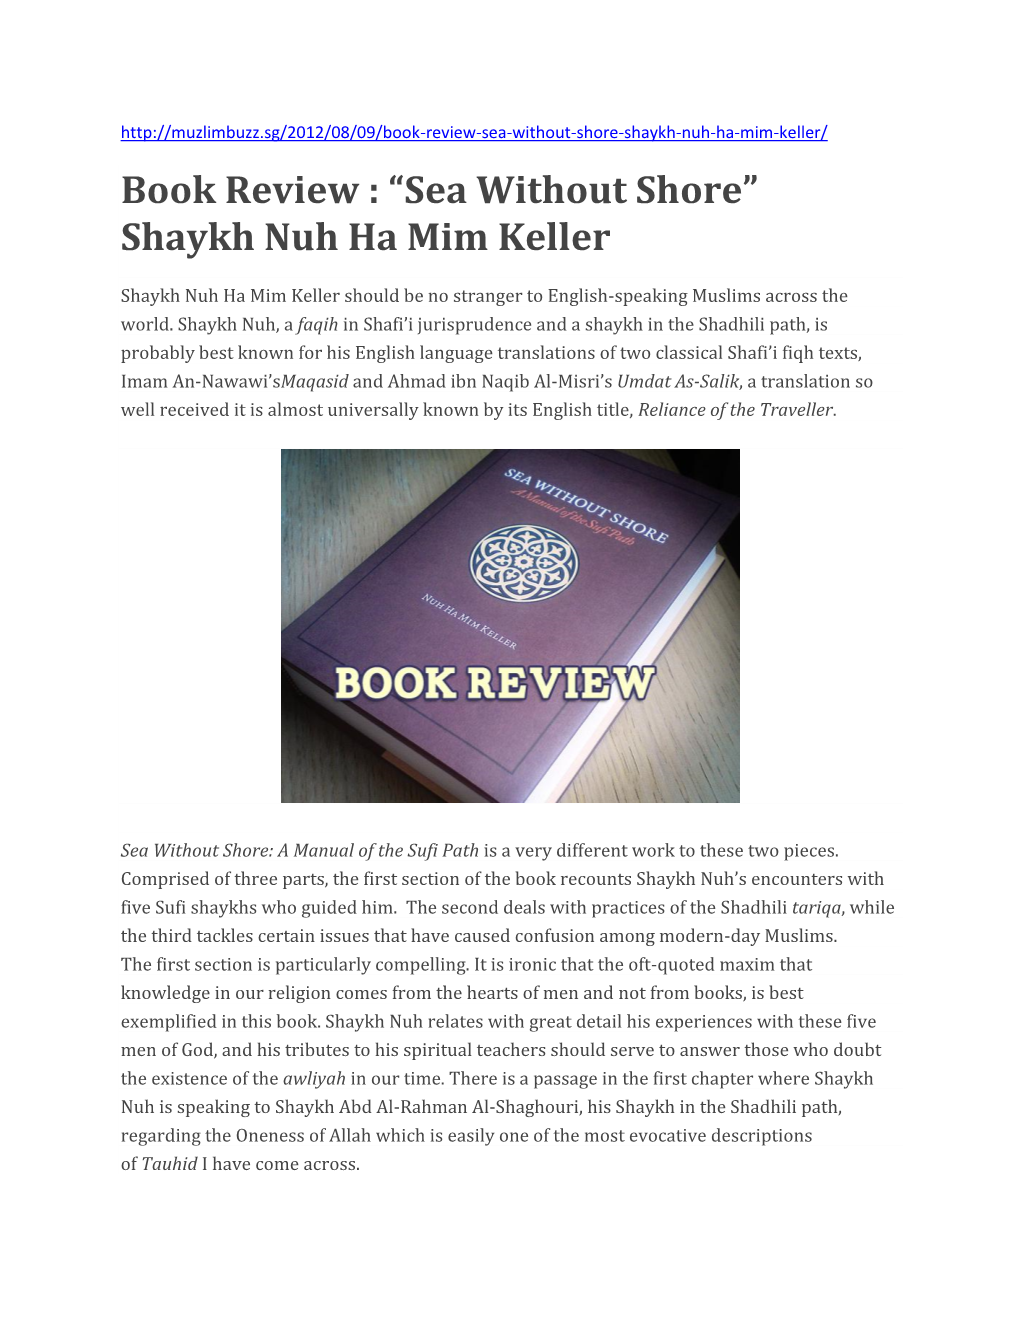 Book Review : “Sea Without Shore” Shaykh Nuh Ha Mim Keller